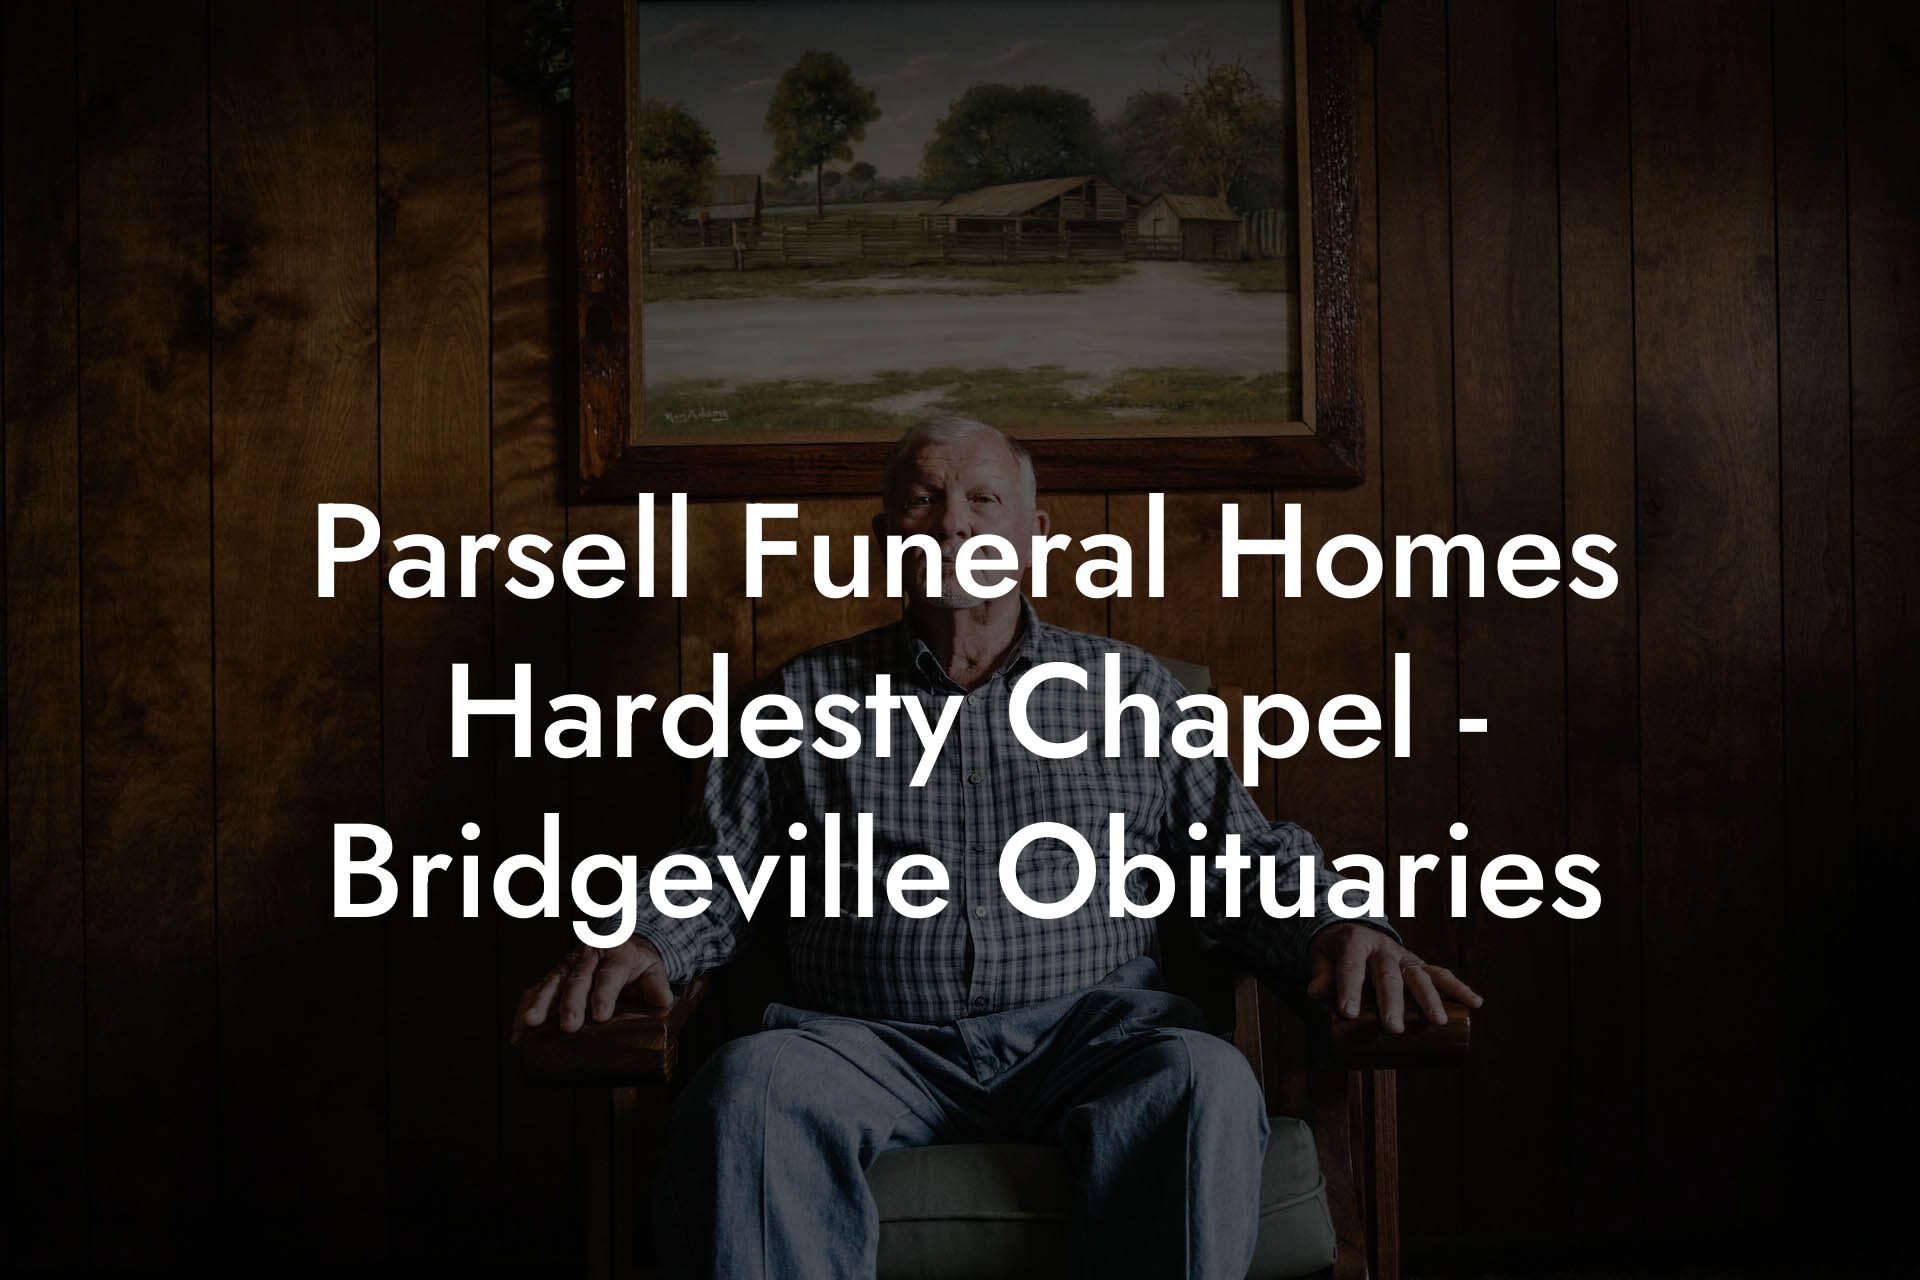 Parsell Funeral Homes Hardesty Chapel - Bridgeville Obituaries